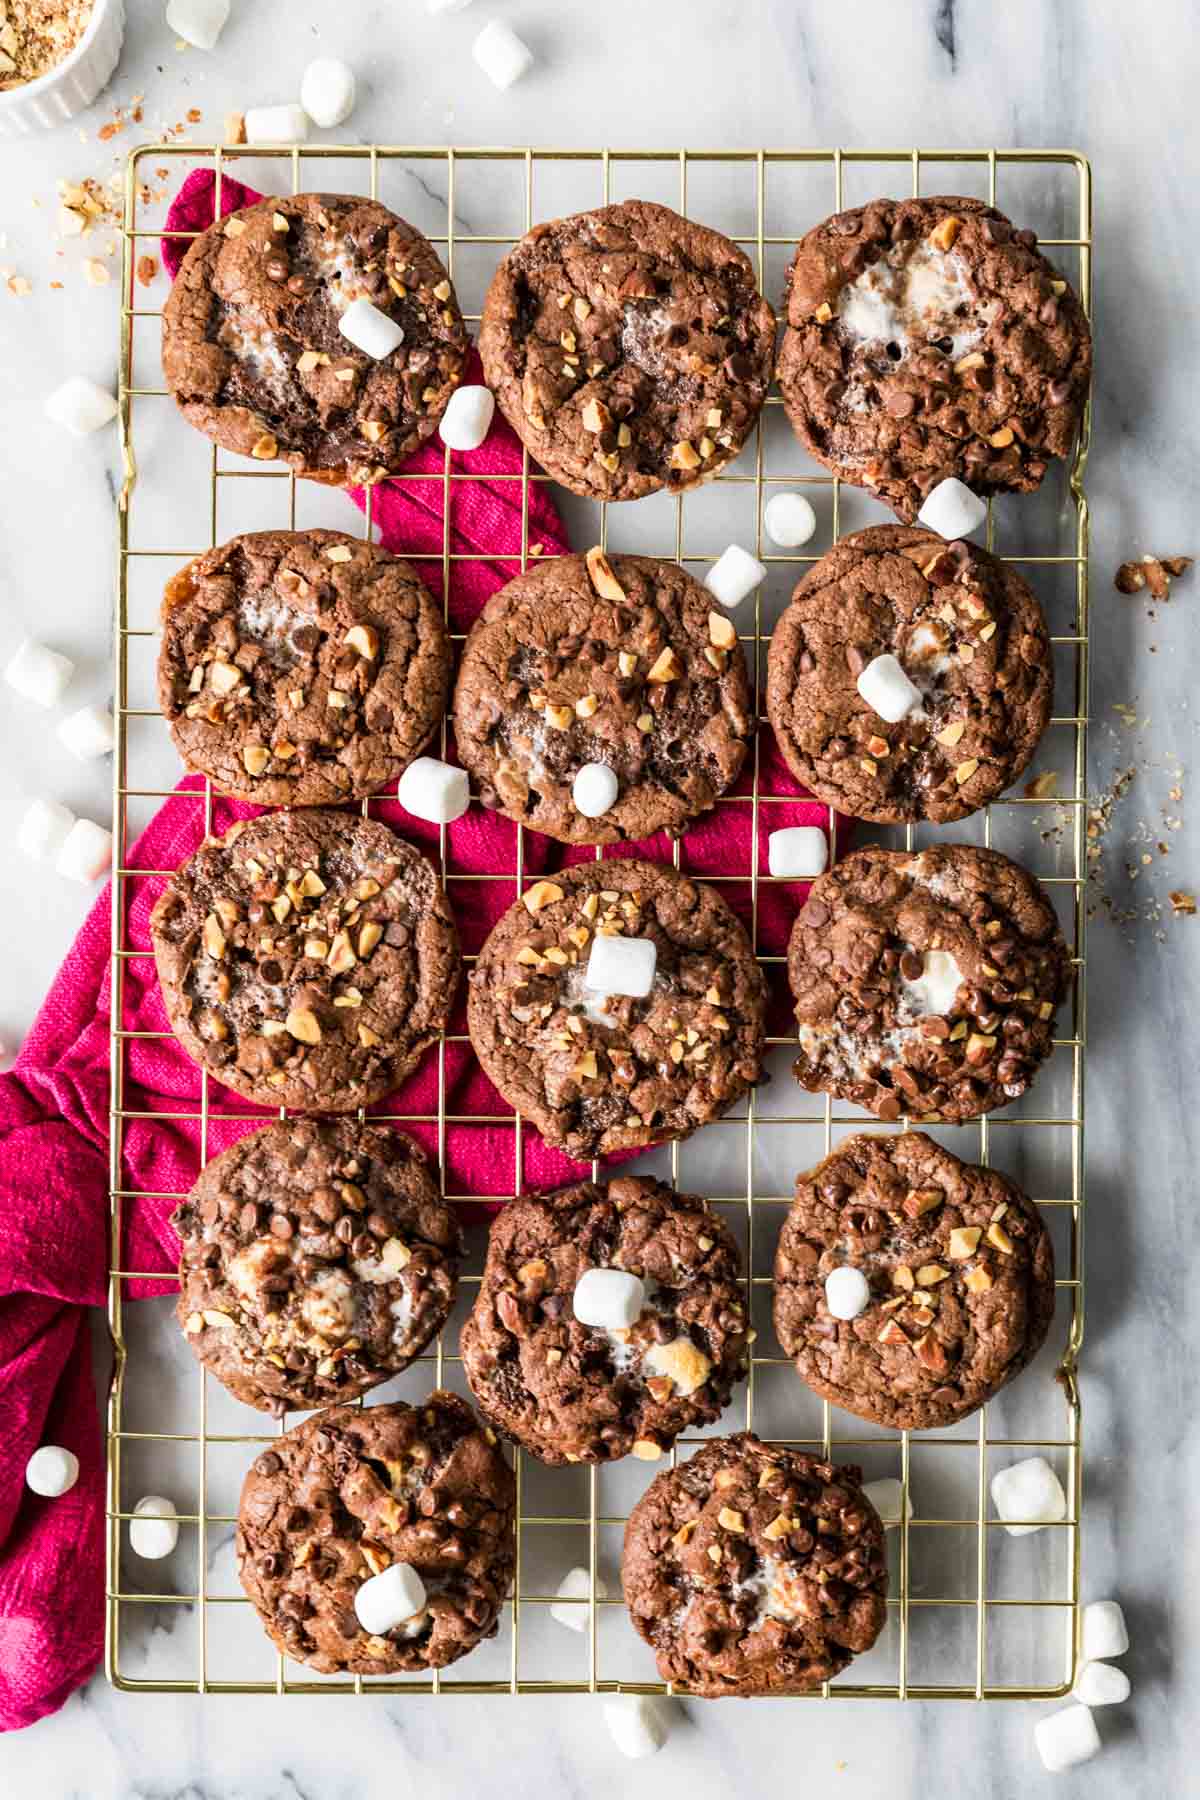 Rocky road cookies arranged in rows on a cooling rack.